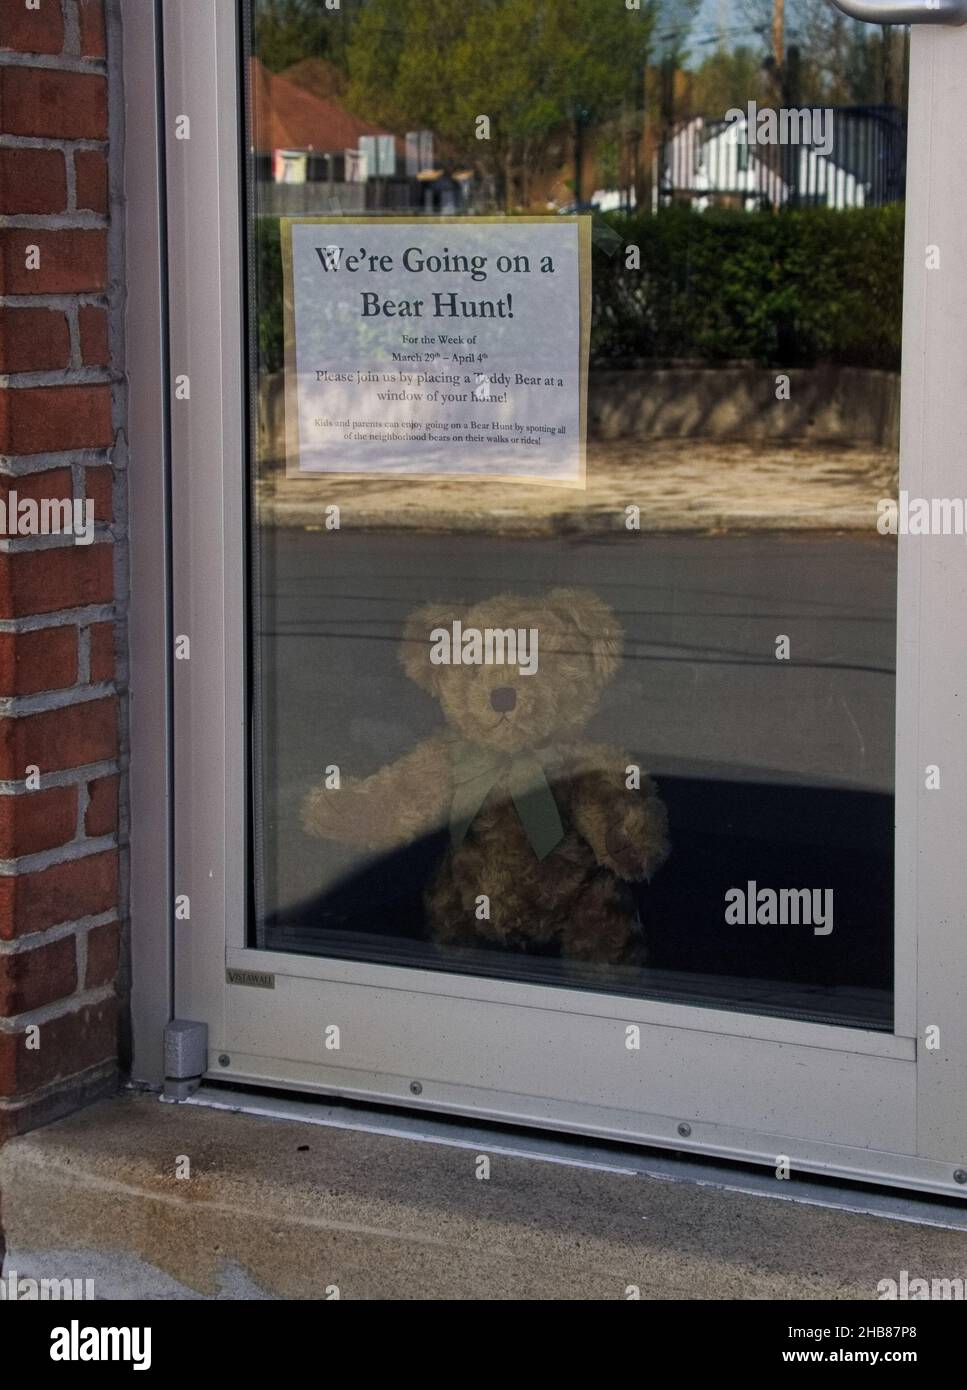 A bear in a window of a local church, for kids to find on a bear hunt to encourage getting outside and to relieve boredom, during the Covid-19 pandemi Stock Photo